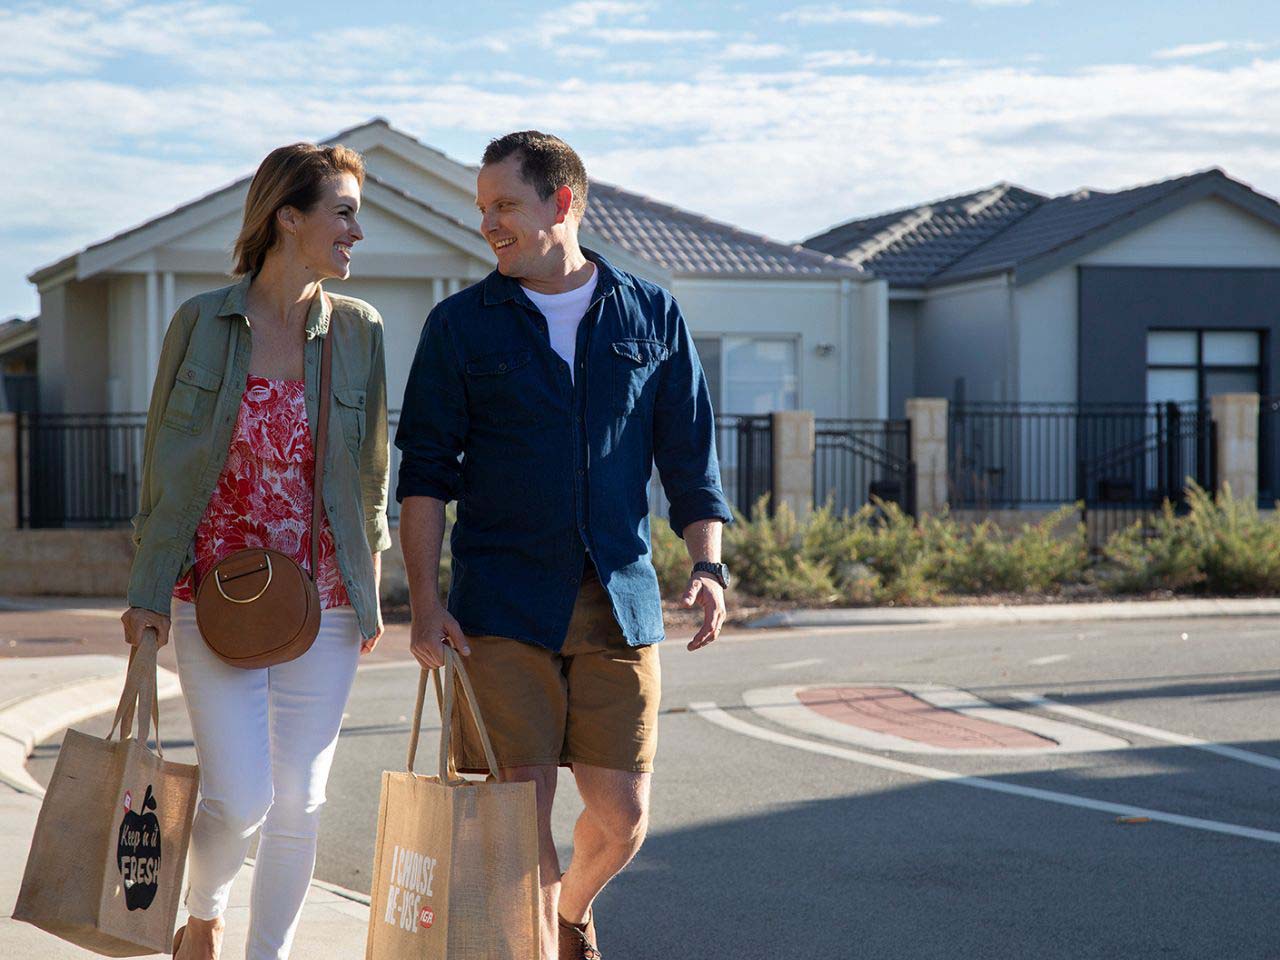 Cassia, Kwinana young couple walking along the street with shopping in their hand